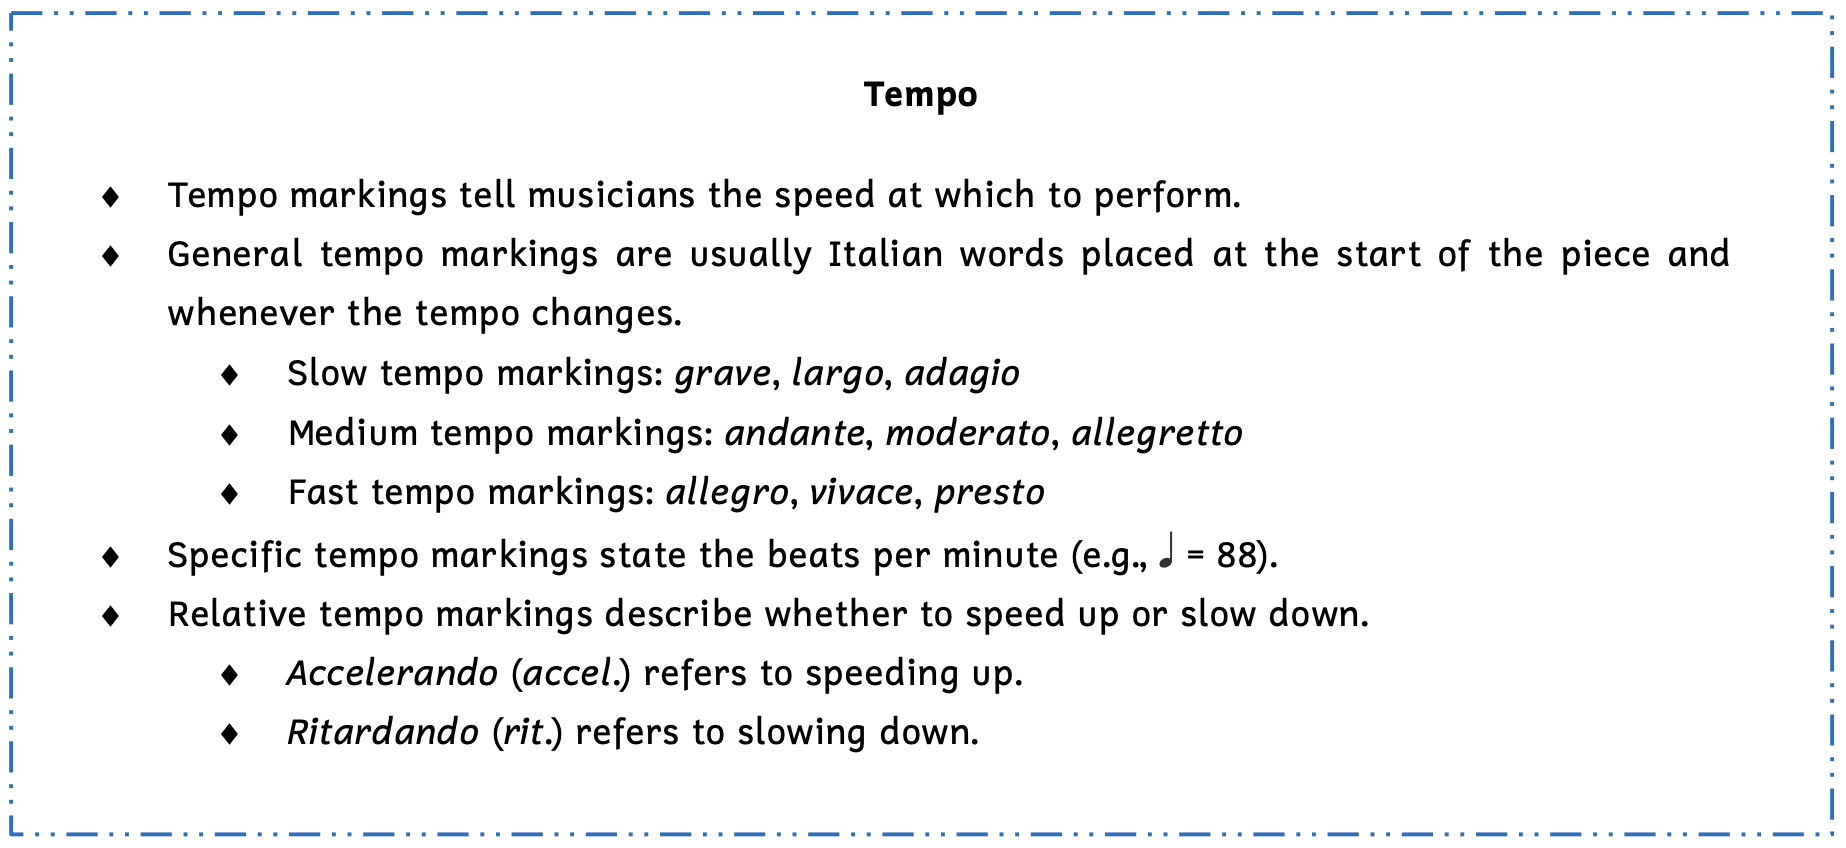 Summary box of tempo. Tempo markings tell musicians the speed at which to perform. General tempo markings are usually Italian words placed at the start of the piece and whenever the tempo changes. Slow tempo markings include grah-vay, largo, and adagio. Medium tempo markings include andante, moderato, and allegretto. Fast tempo markings include allegro, vivace, and presto. Specific tempo markings state the beats per measure. For example, a quarter note equals 88 beats per minute. Relative tempo markings describe whether to speed up or slow down. Accelerando refers to speeding up. Ritardando refers to slowing down.